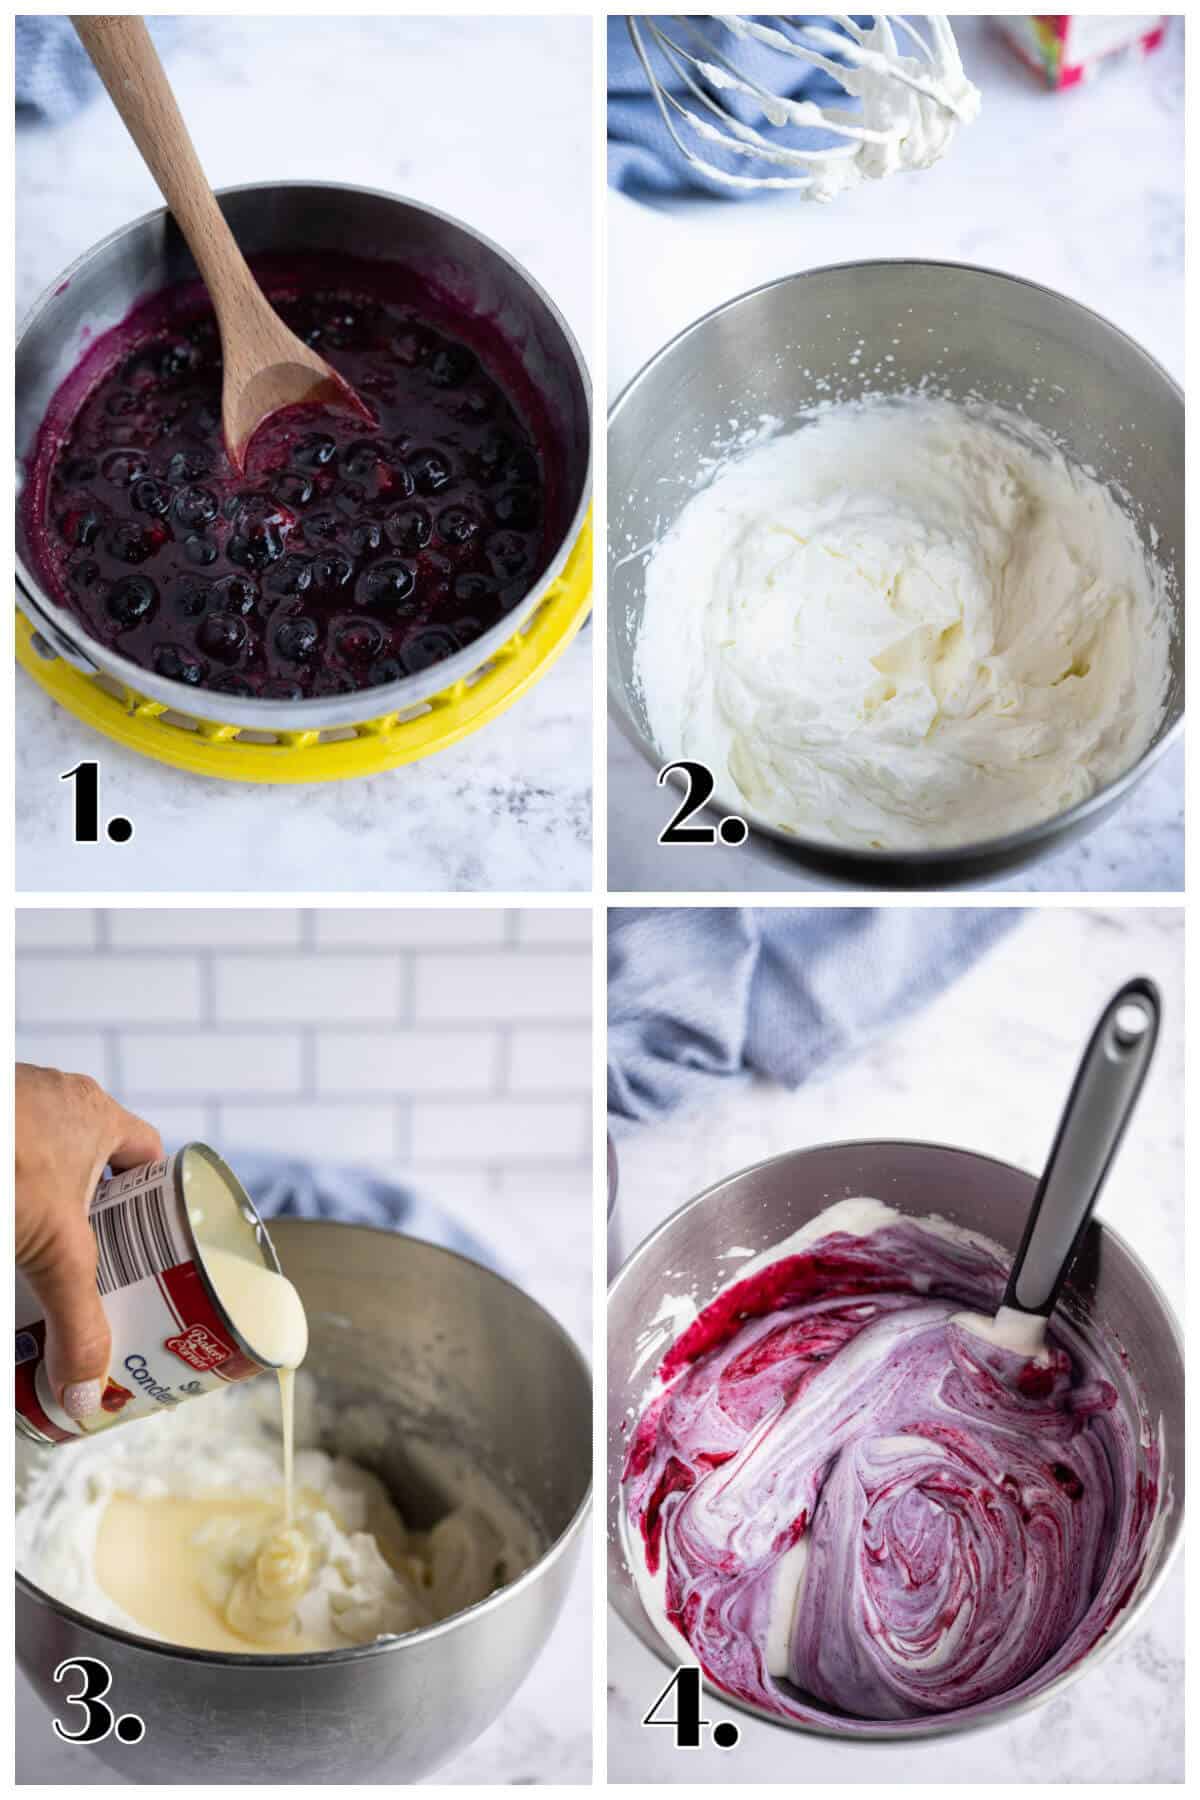 4 image collage highlighting steps to make blueberry ice cream: 1-cook down blueberries; 2-whip cream; 3-stir in sweetened condensed milk; 4-stir in cooled blueberry sauce.